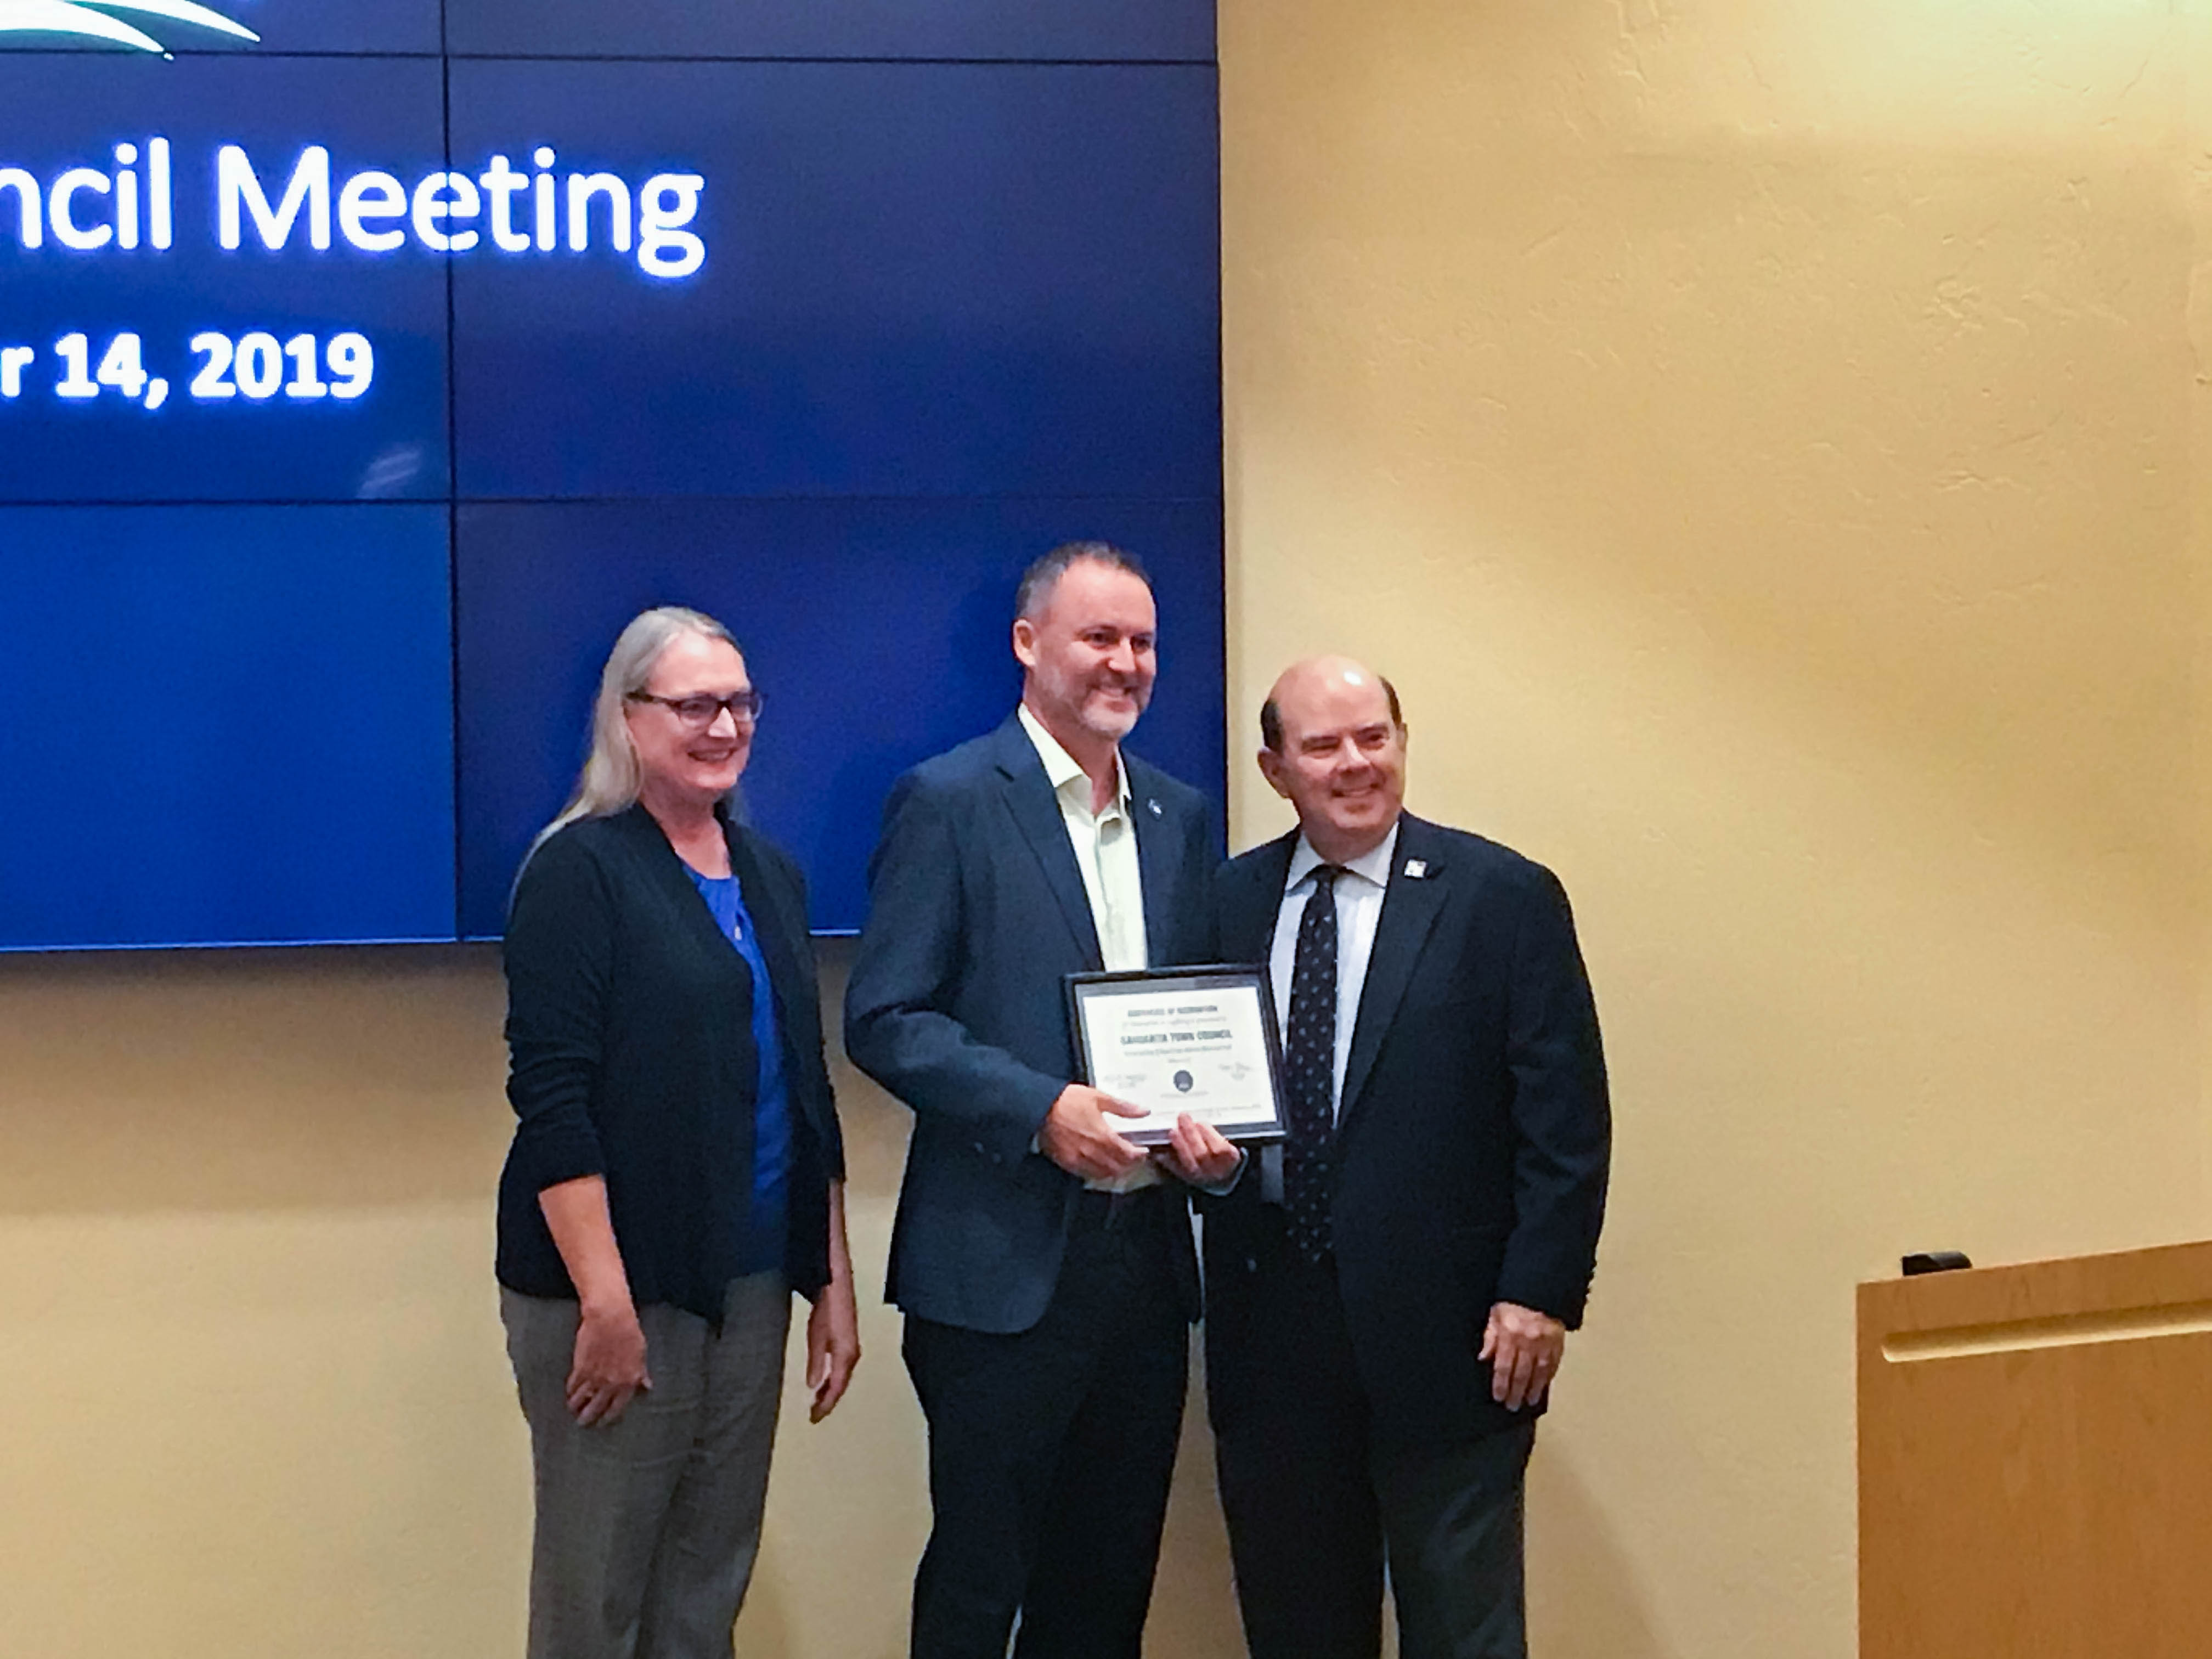 Sahuarita Town Council Receives Certificate of Recognition from International Dark-Sky Association Image